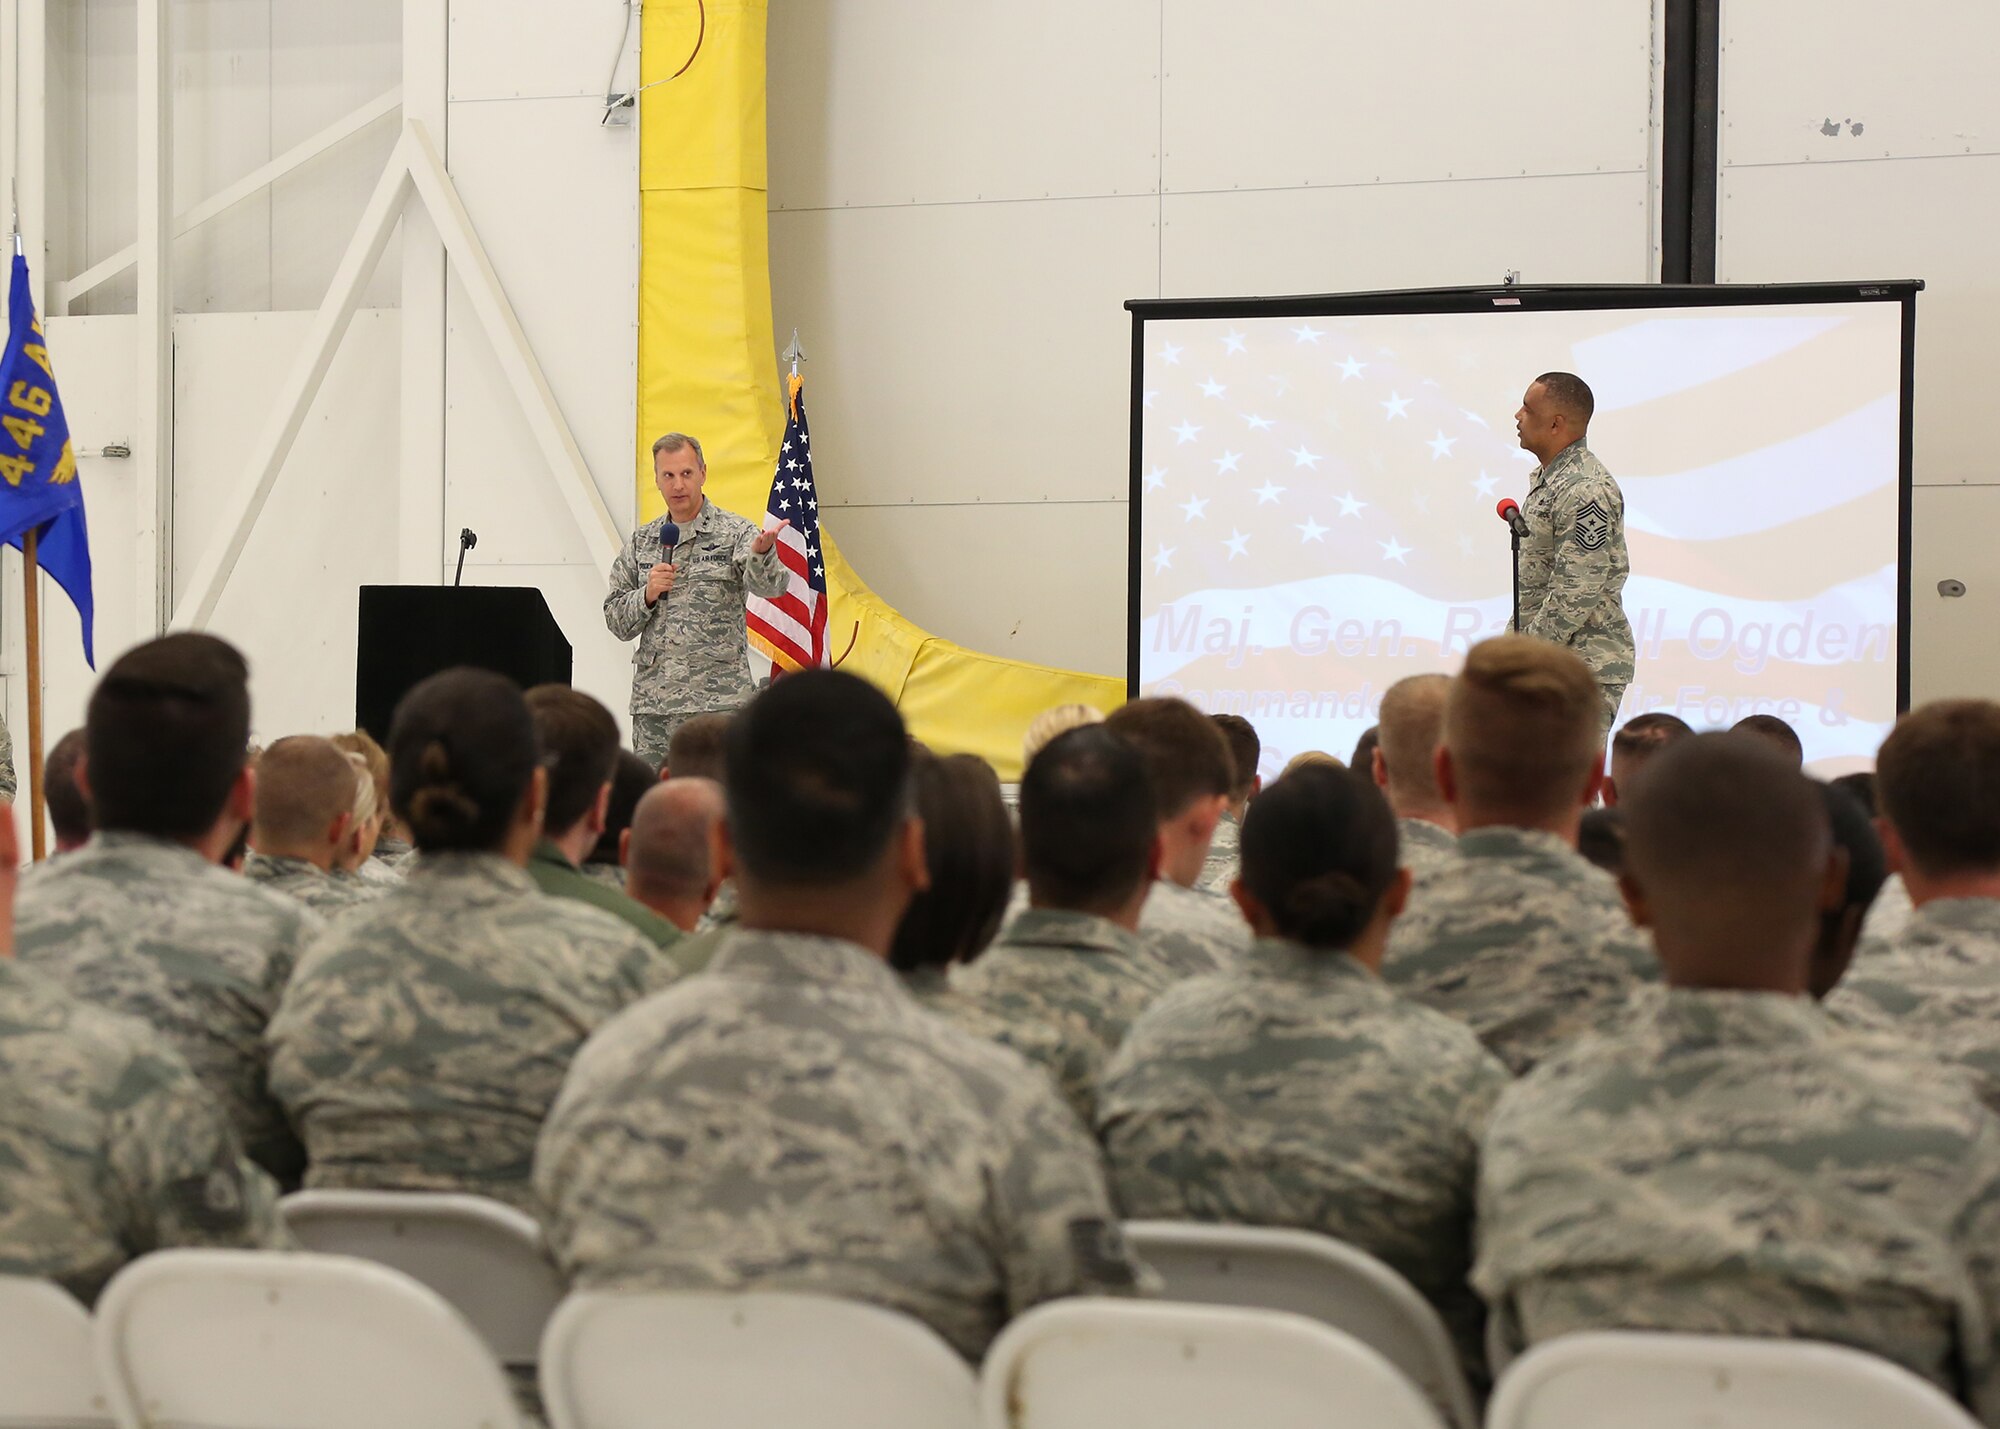 Maj. Gen. Odgen and Command Chief White address Rainier Wing Airmen during a Commander's Cal